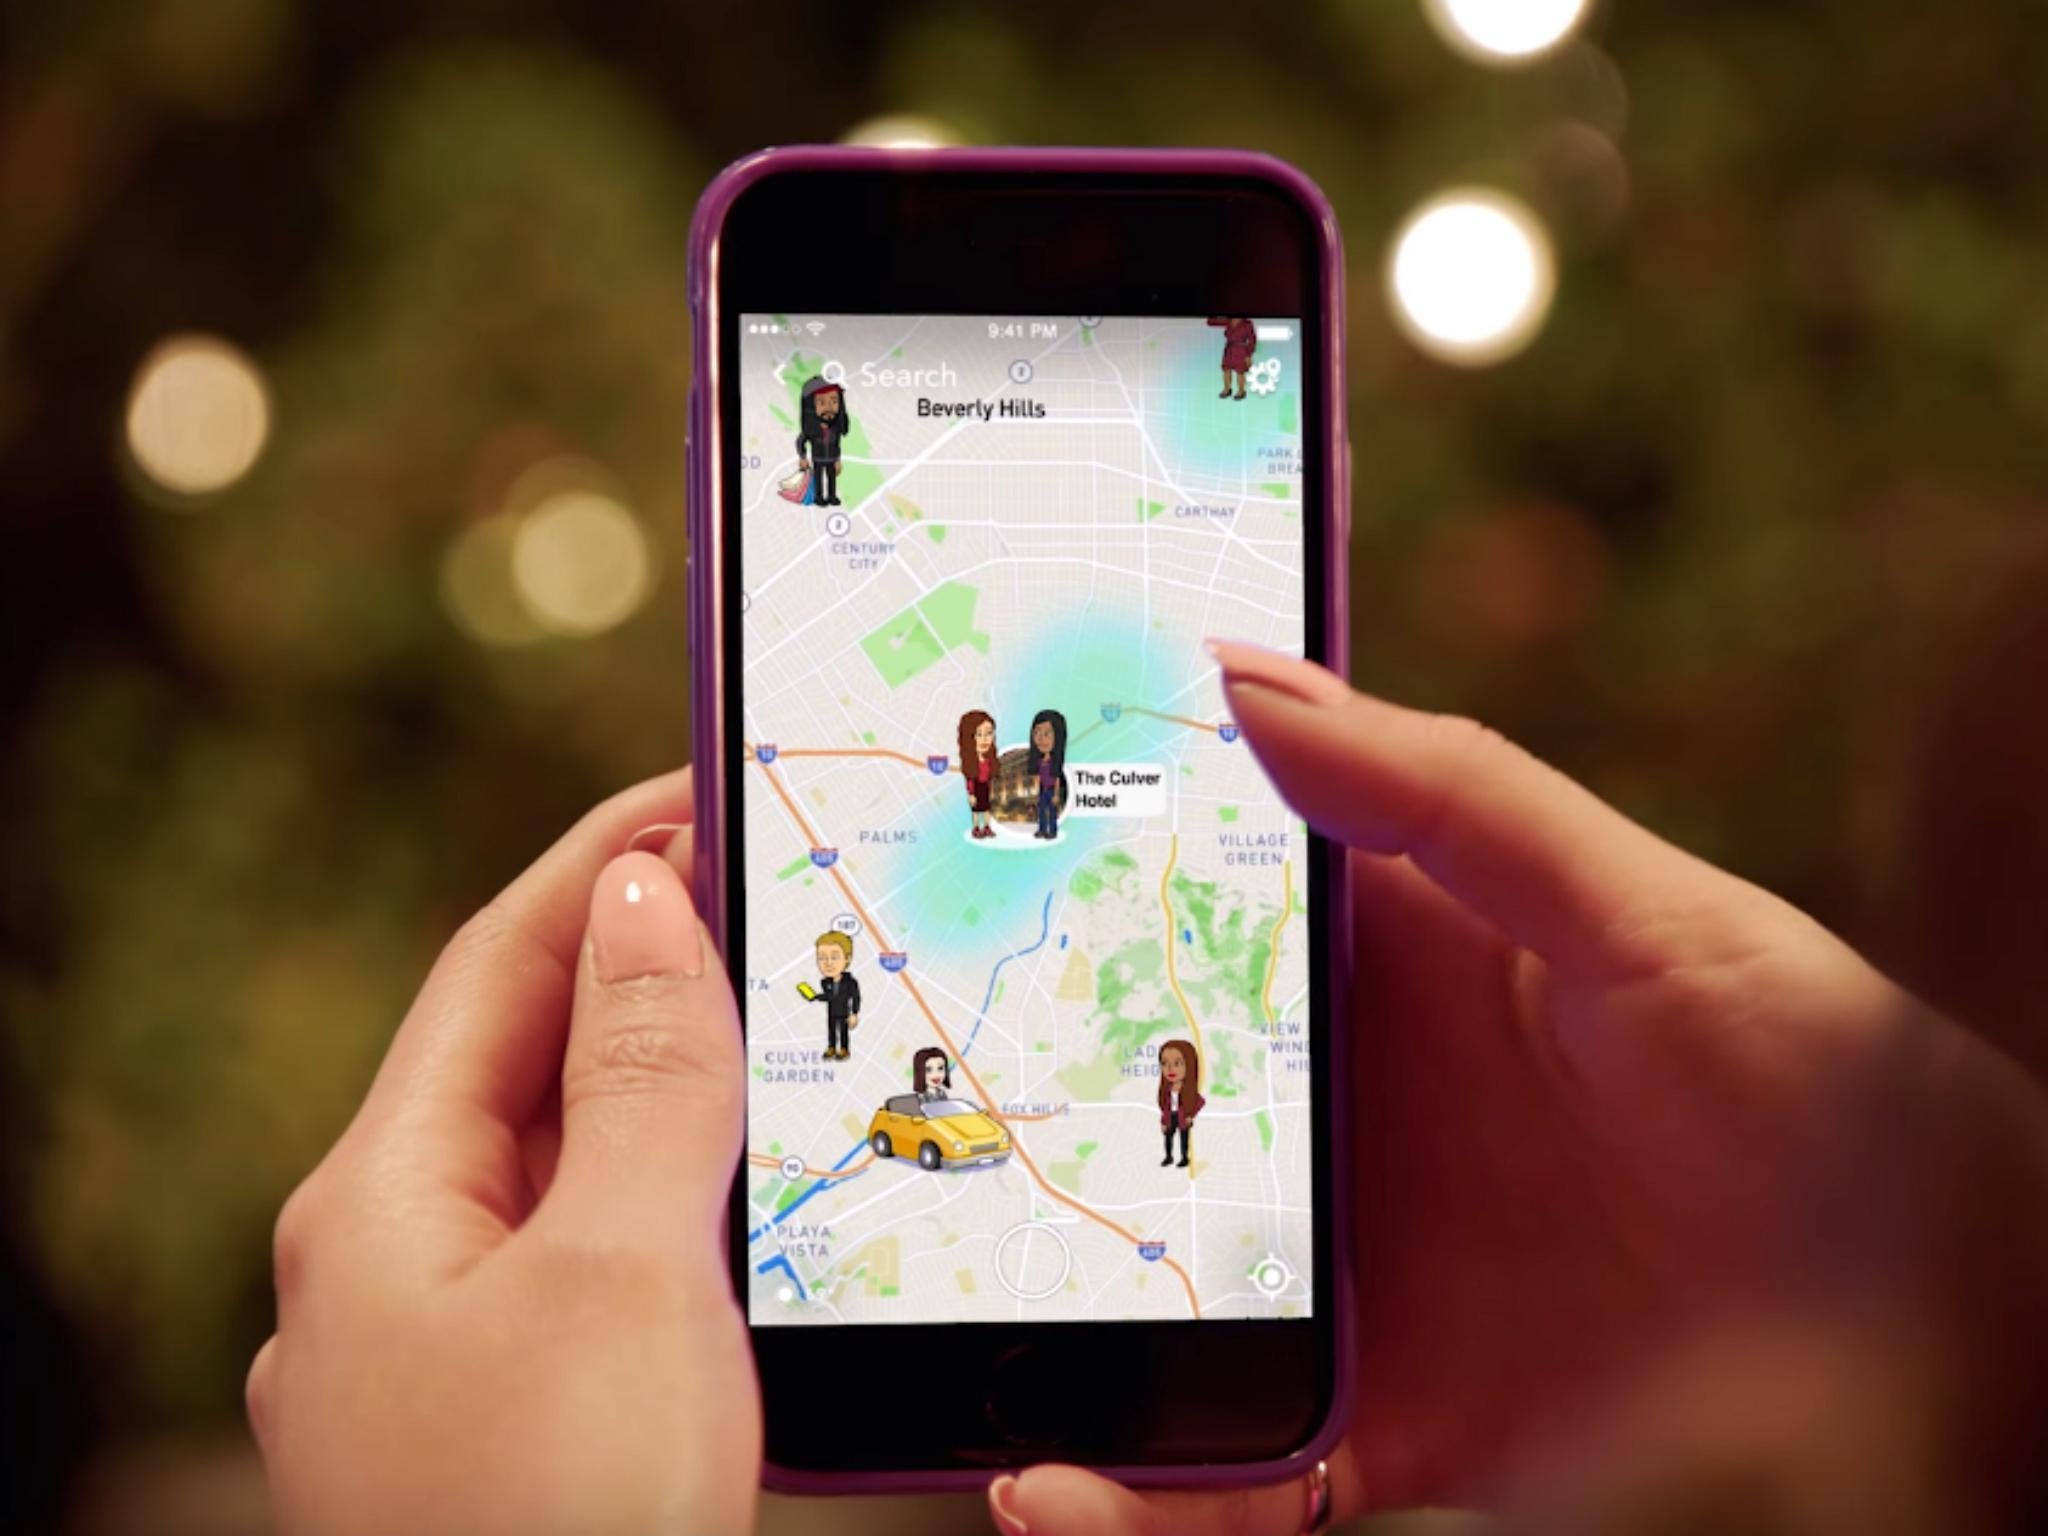 Snap Map has faced widespread criticism